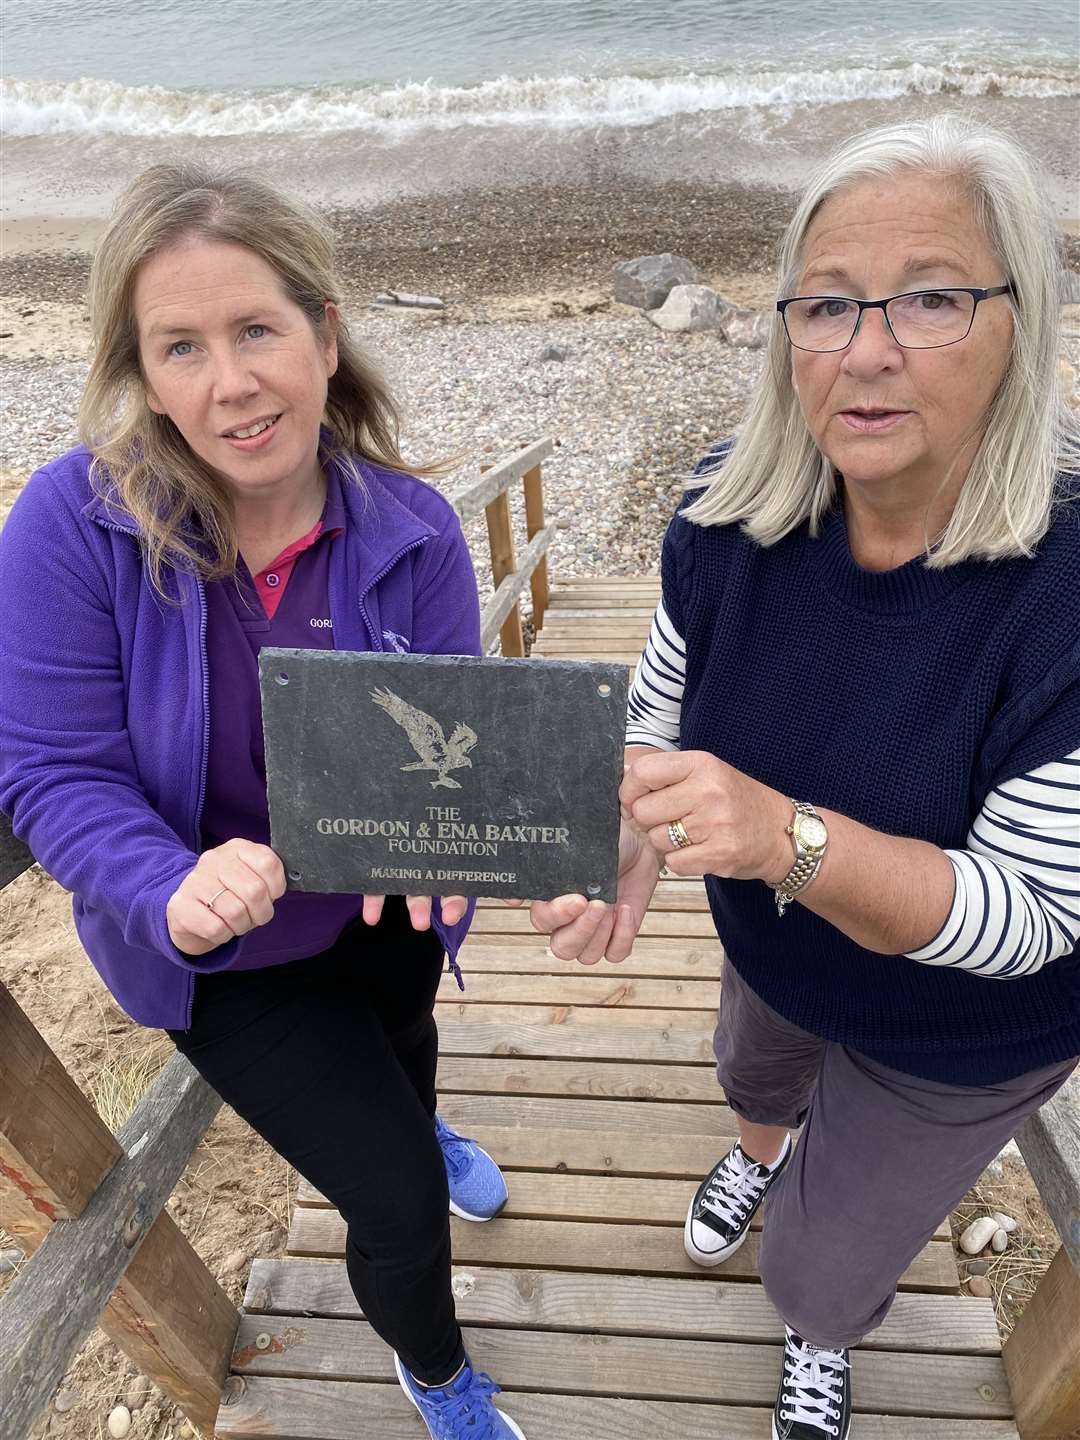 Cathy Low from Findhorn (right) with Sarah Rollo, and a plaque to mark the foundation’s donation.